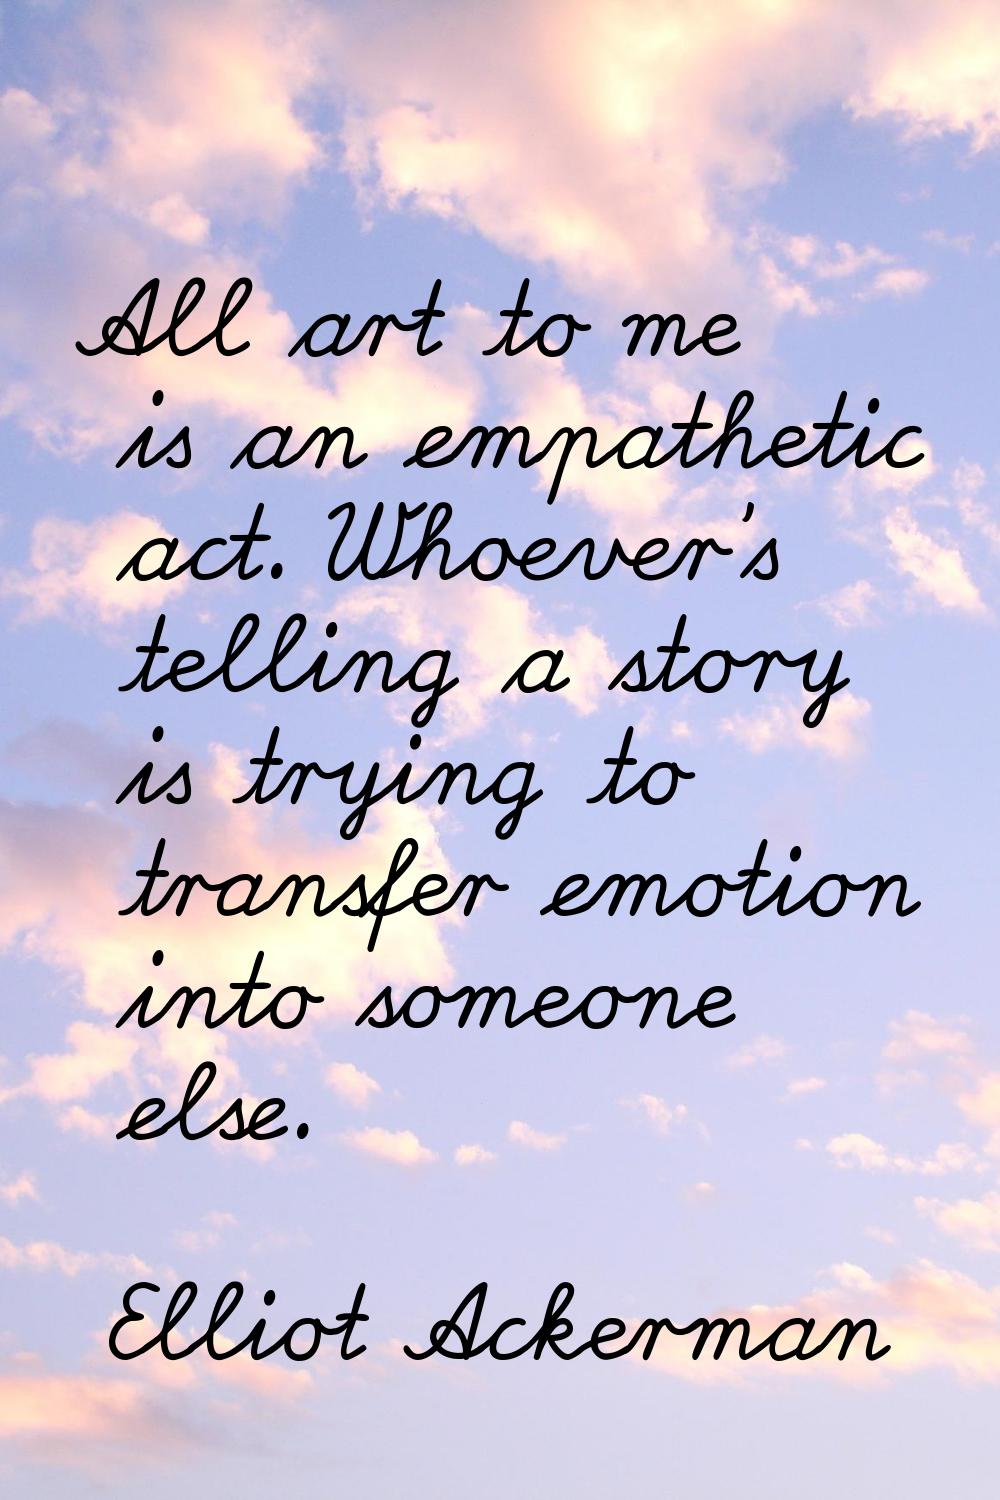 All art to me is an empathetic act. Whoever's telling a story is trying to transfer emotion into so